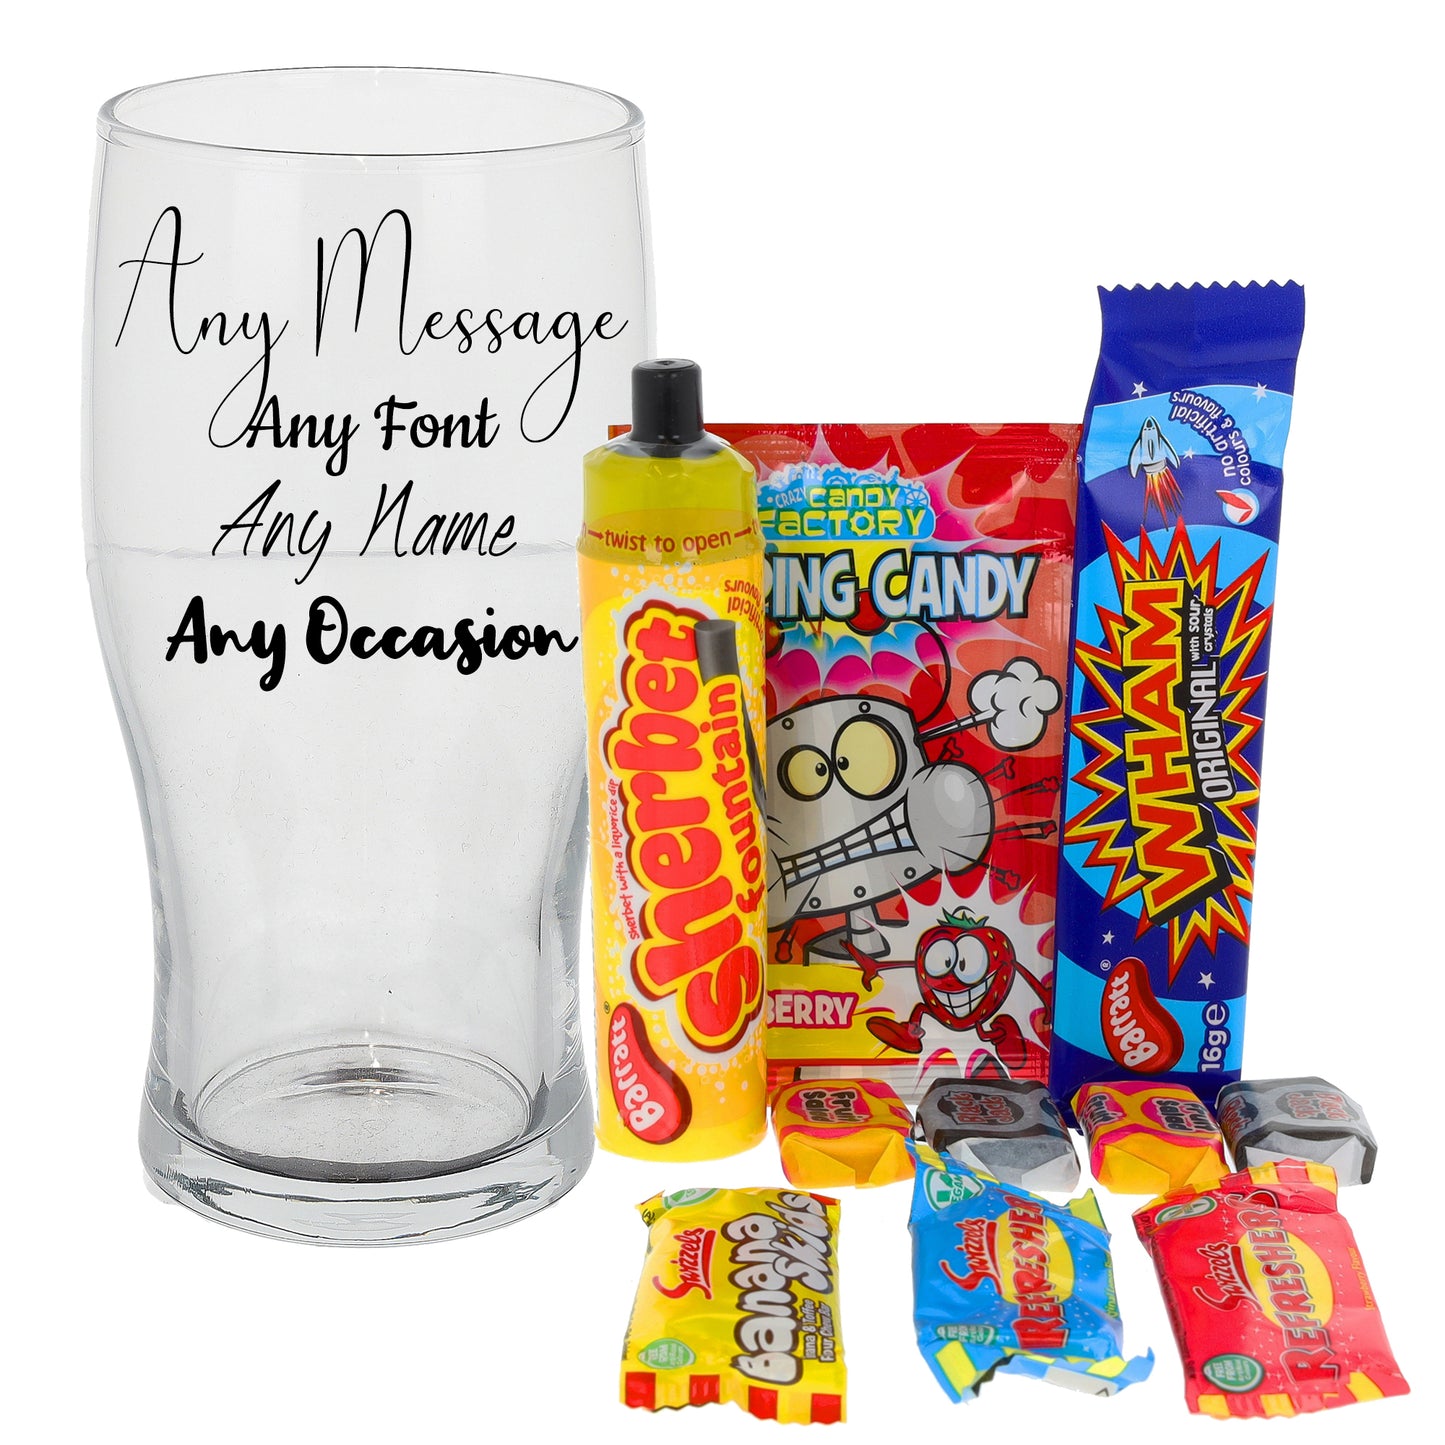 Create Your Own Beer or Lager Pint Glass  - Always Looking Good -   